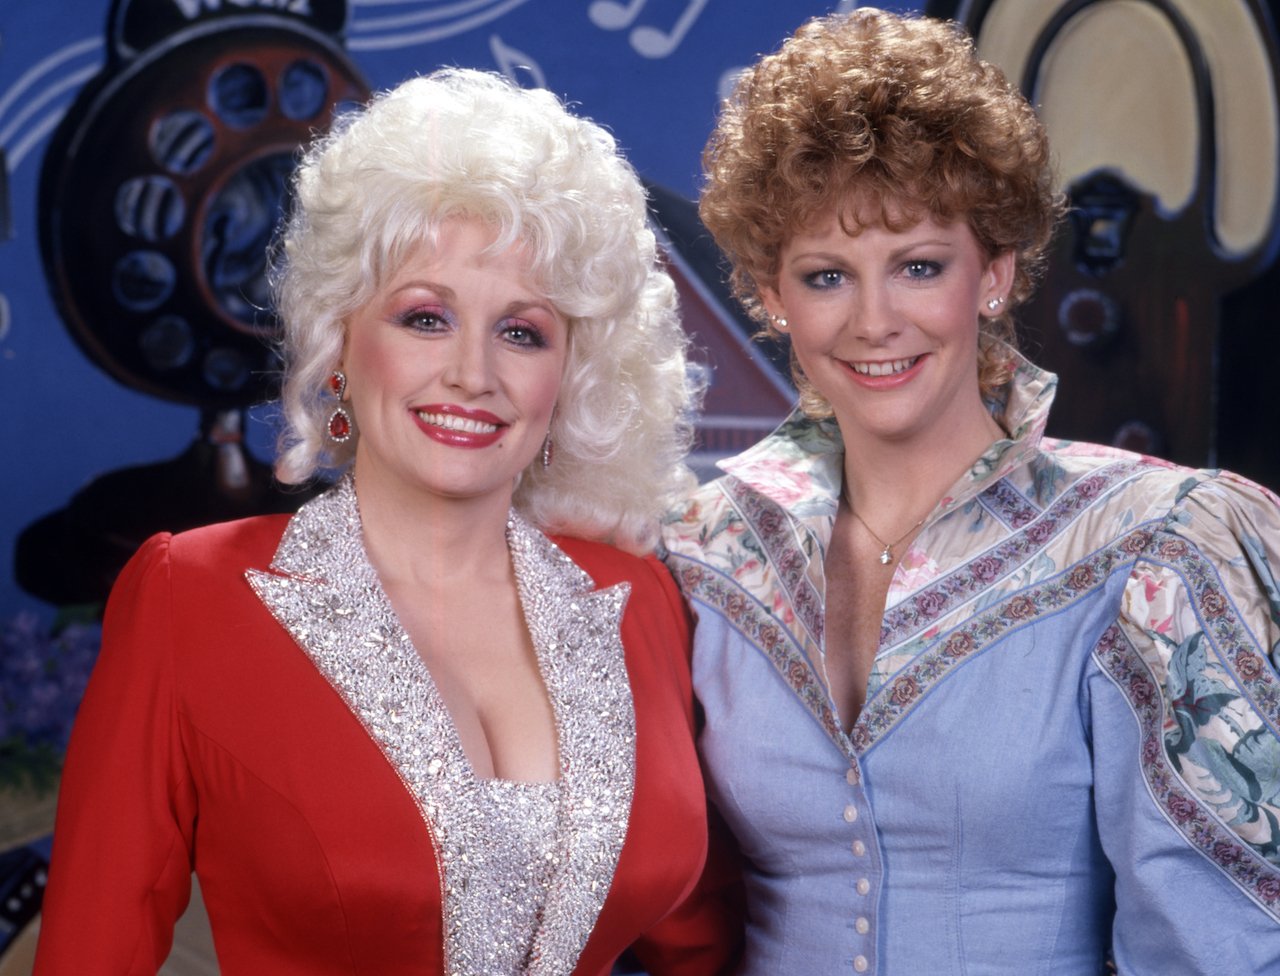 (L-R) Dolly Parton in red and Reba McEntire in blue, c. 1986